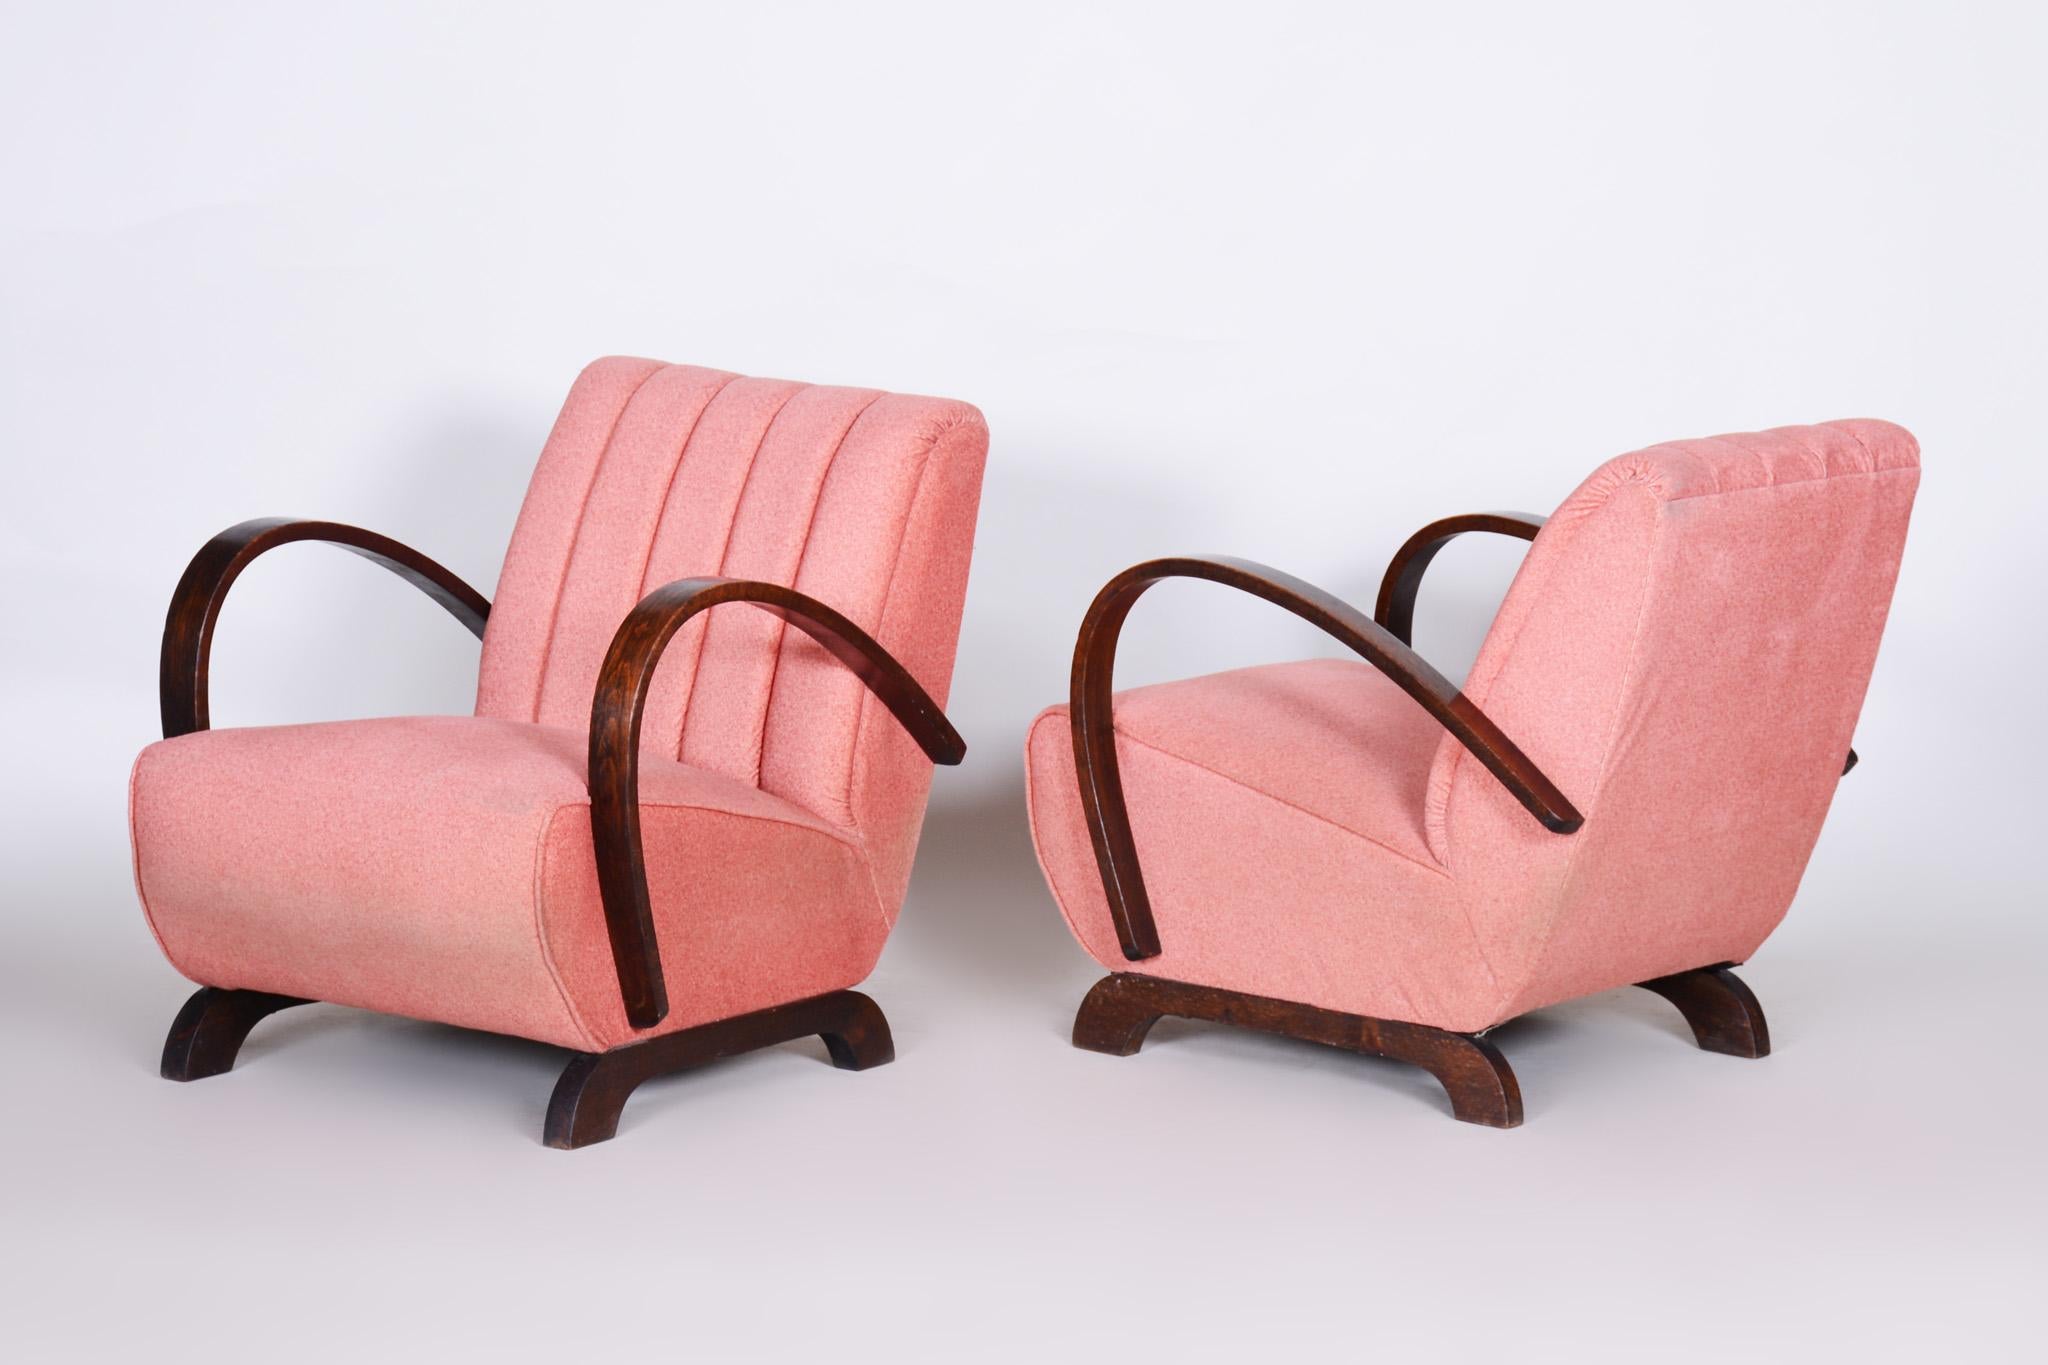 Pink Fabric Armchair Made in Czechia, 1930s, Original Condition, Art Deco Style For Sale 4